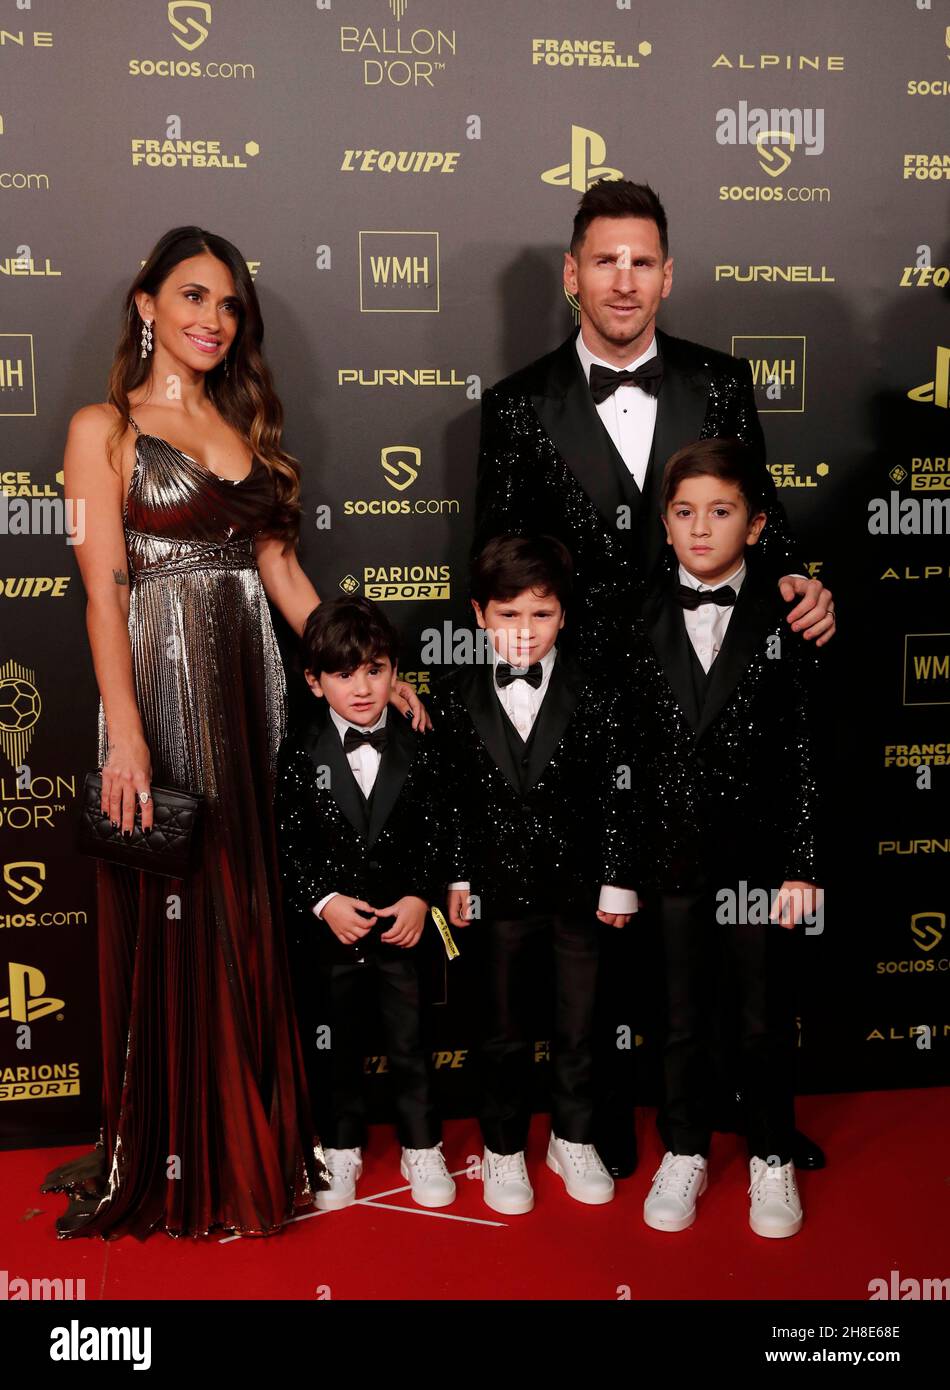 Lionel messi and wife hi-res stock photography and images - Page 3 - Alamy